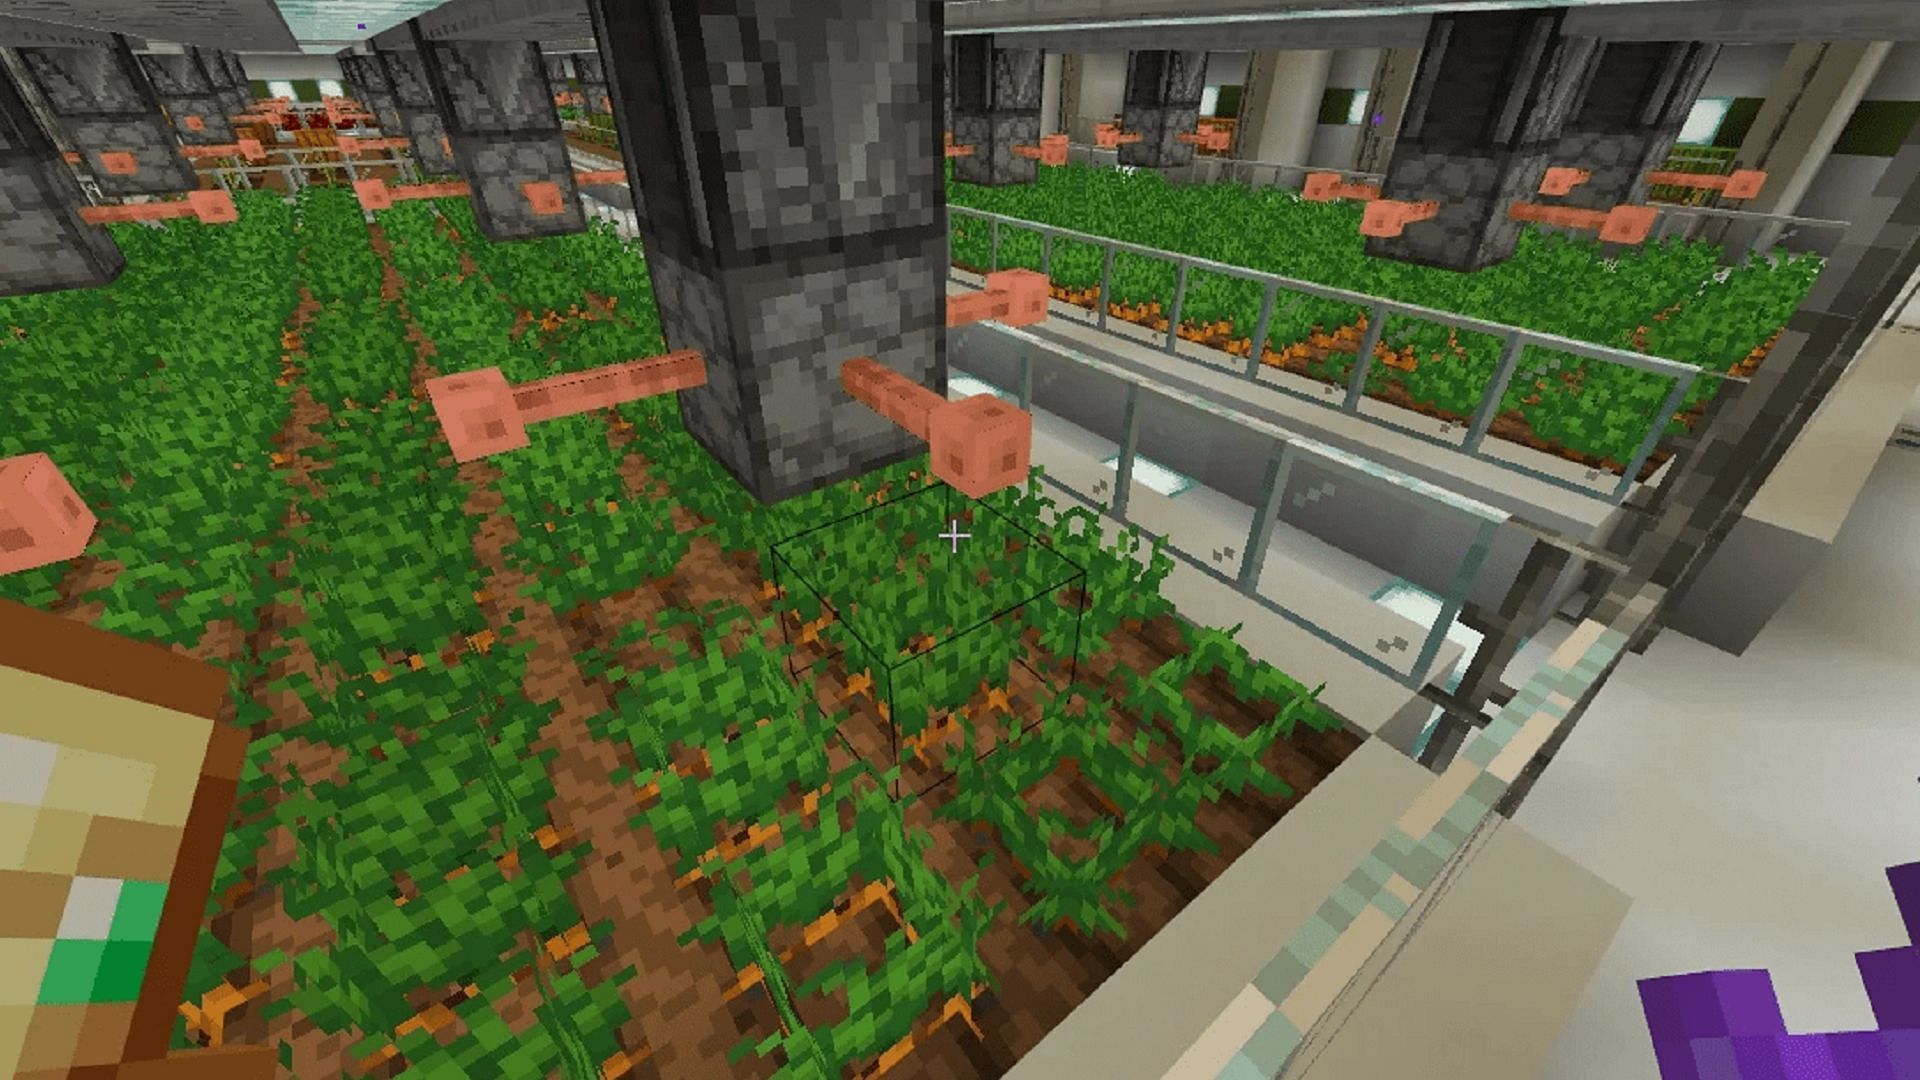 This Minecraft base has all the crops a player could possibly need (Image via Aistan83/Reddit)